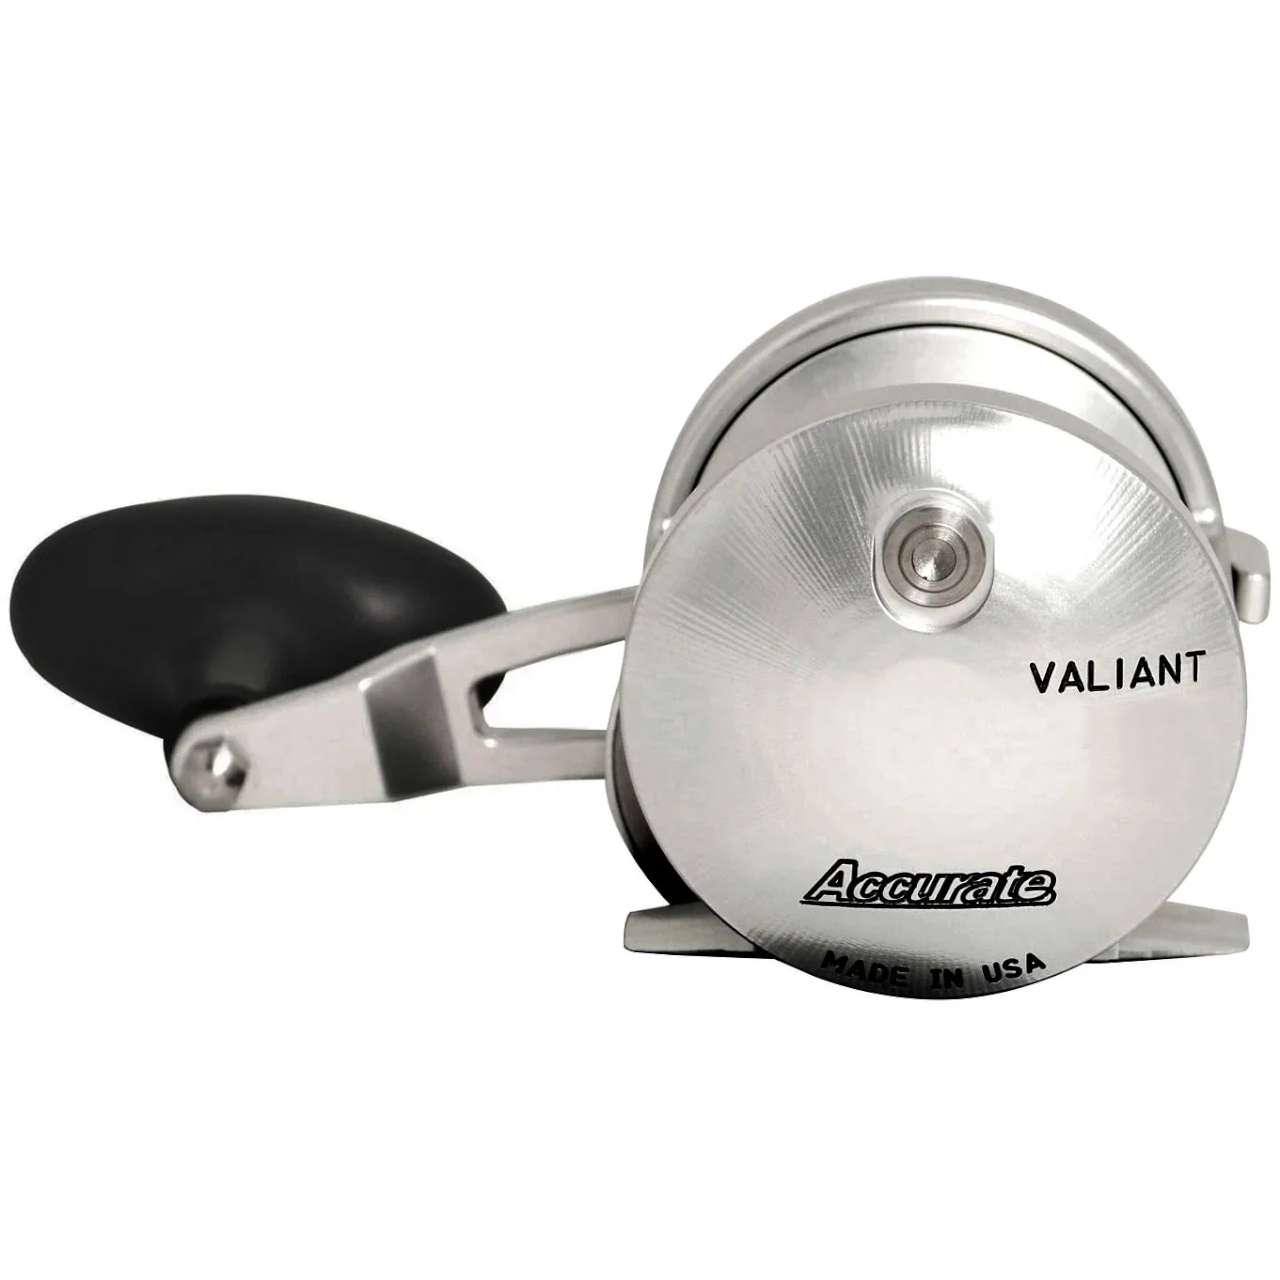 Accurate Valiant 600 Two Speed Reels - Melton Tackle